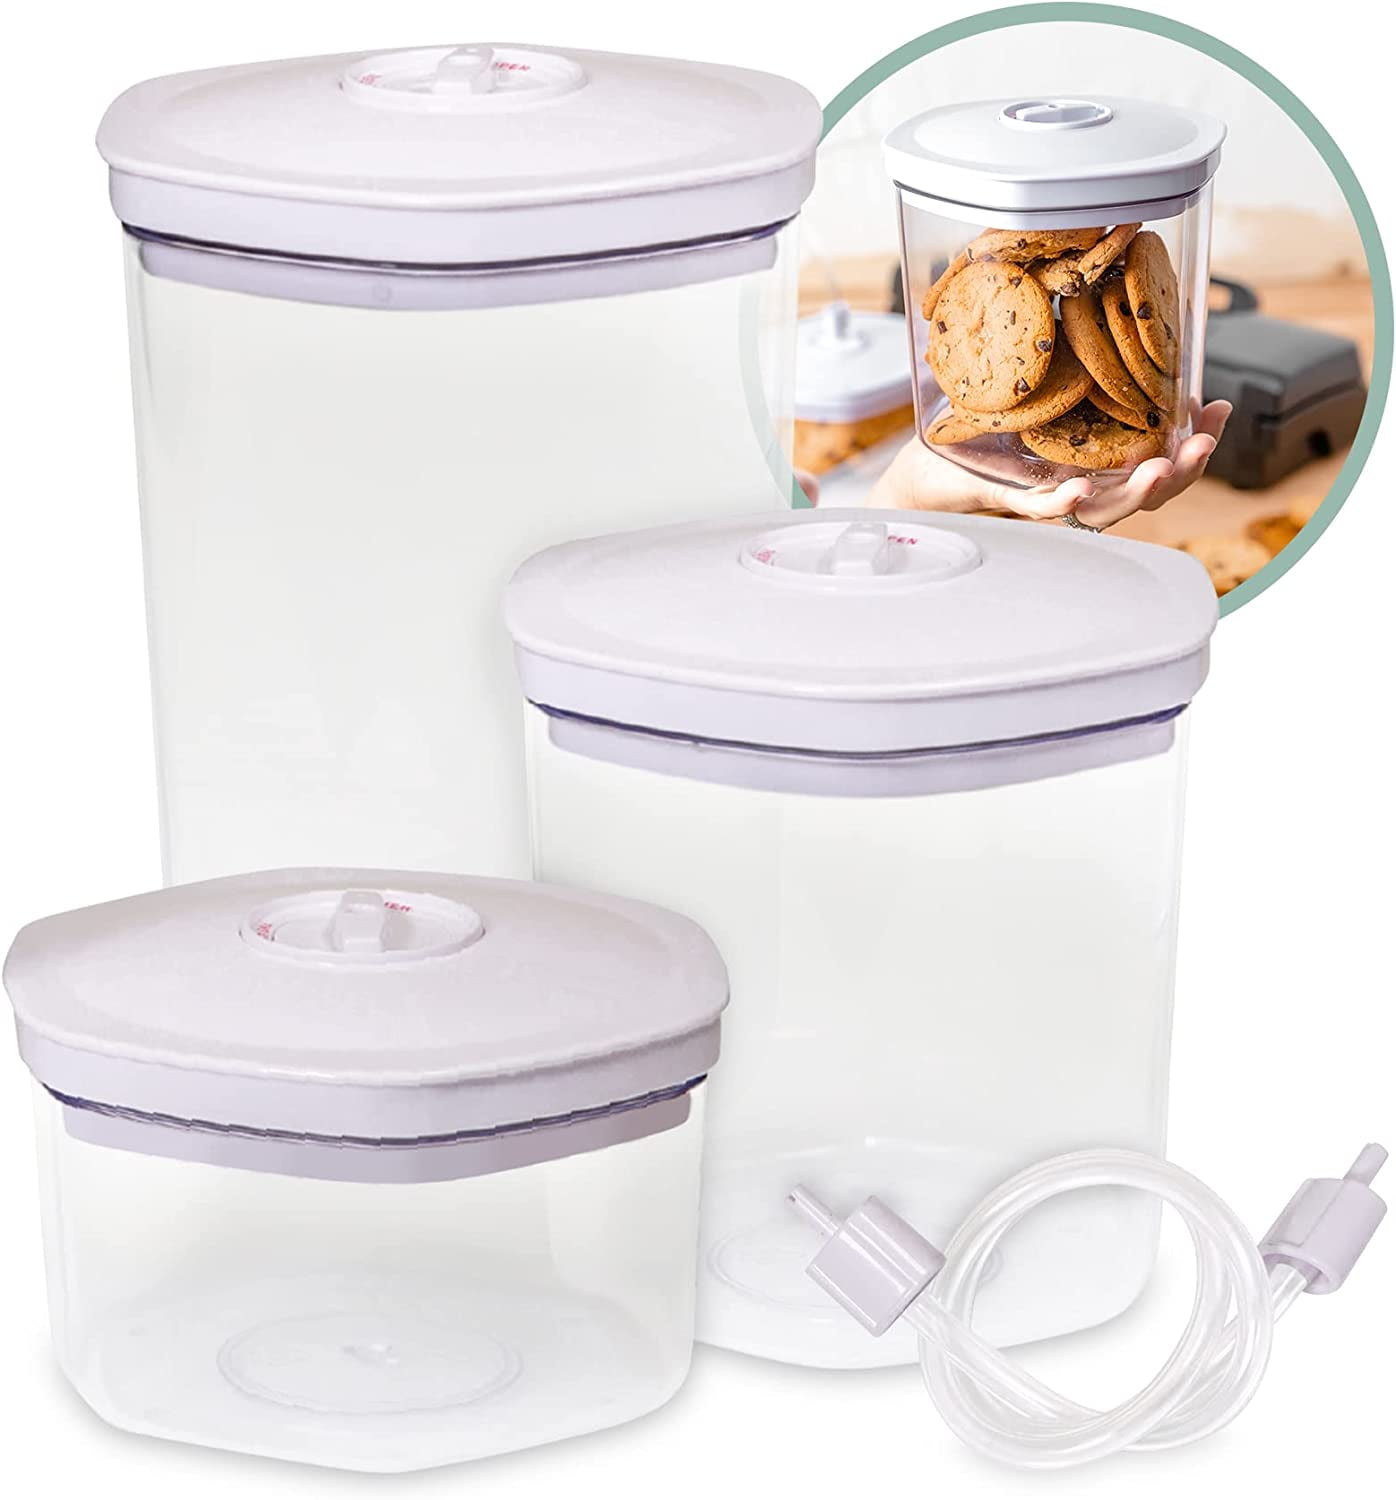 Avid Armor 3-Piece Food Vacuum Canister Set, Universal Hose Attachment  Included